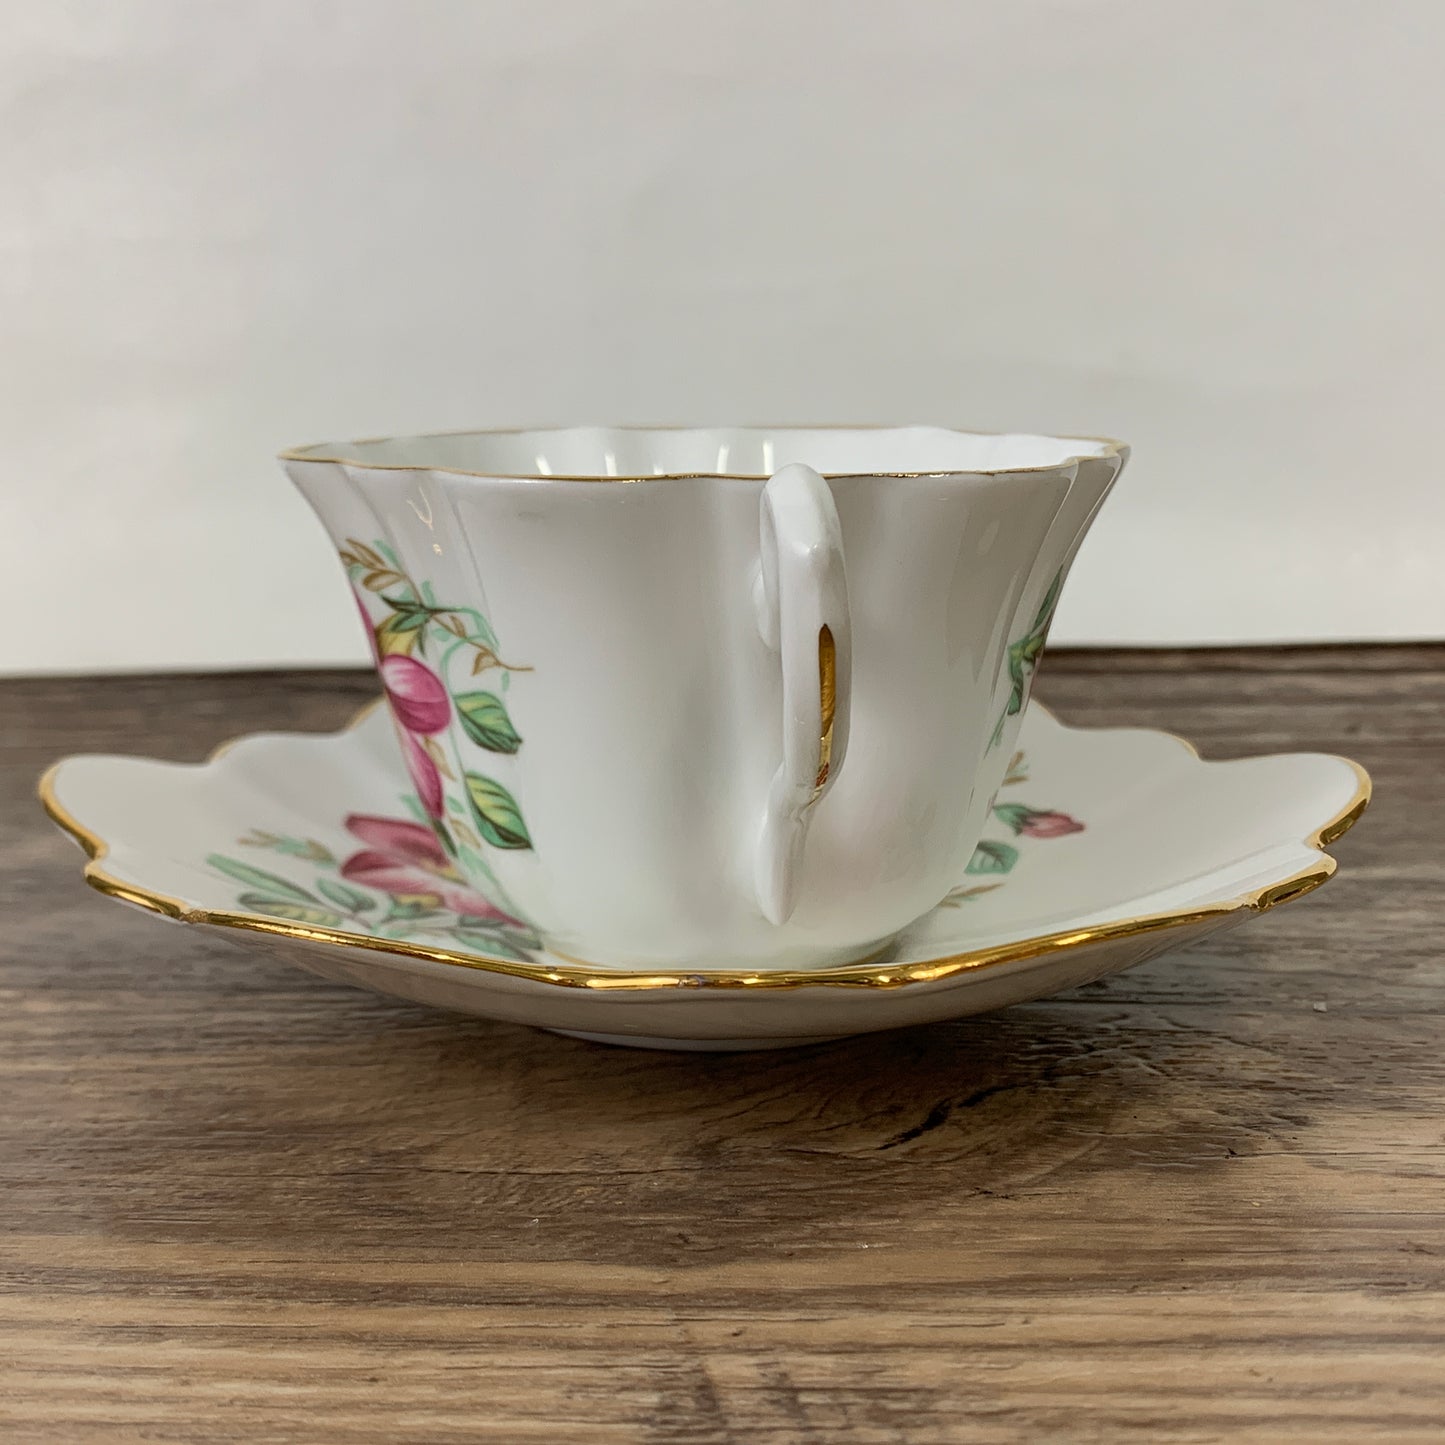 Vintage China Teacup with Pink Floral Pattern